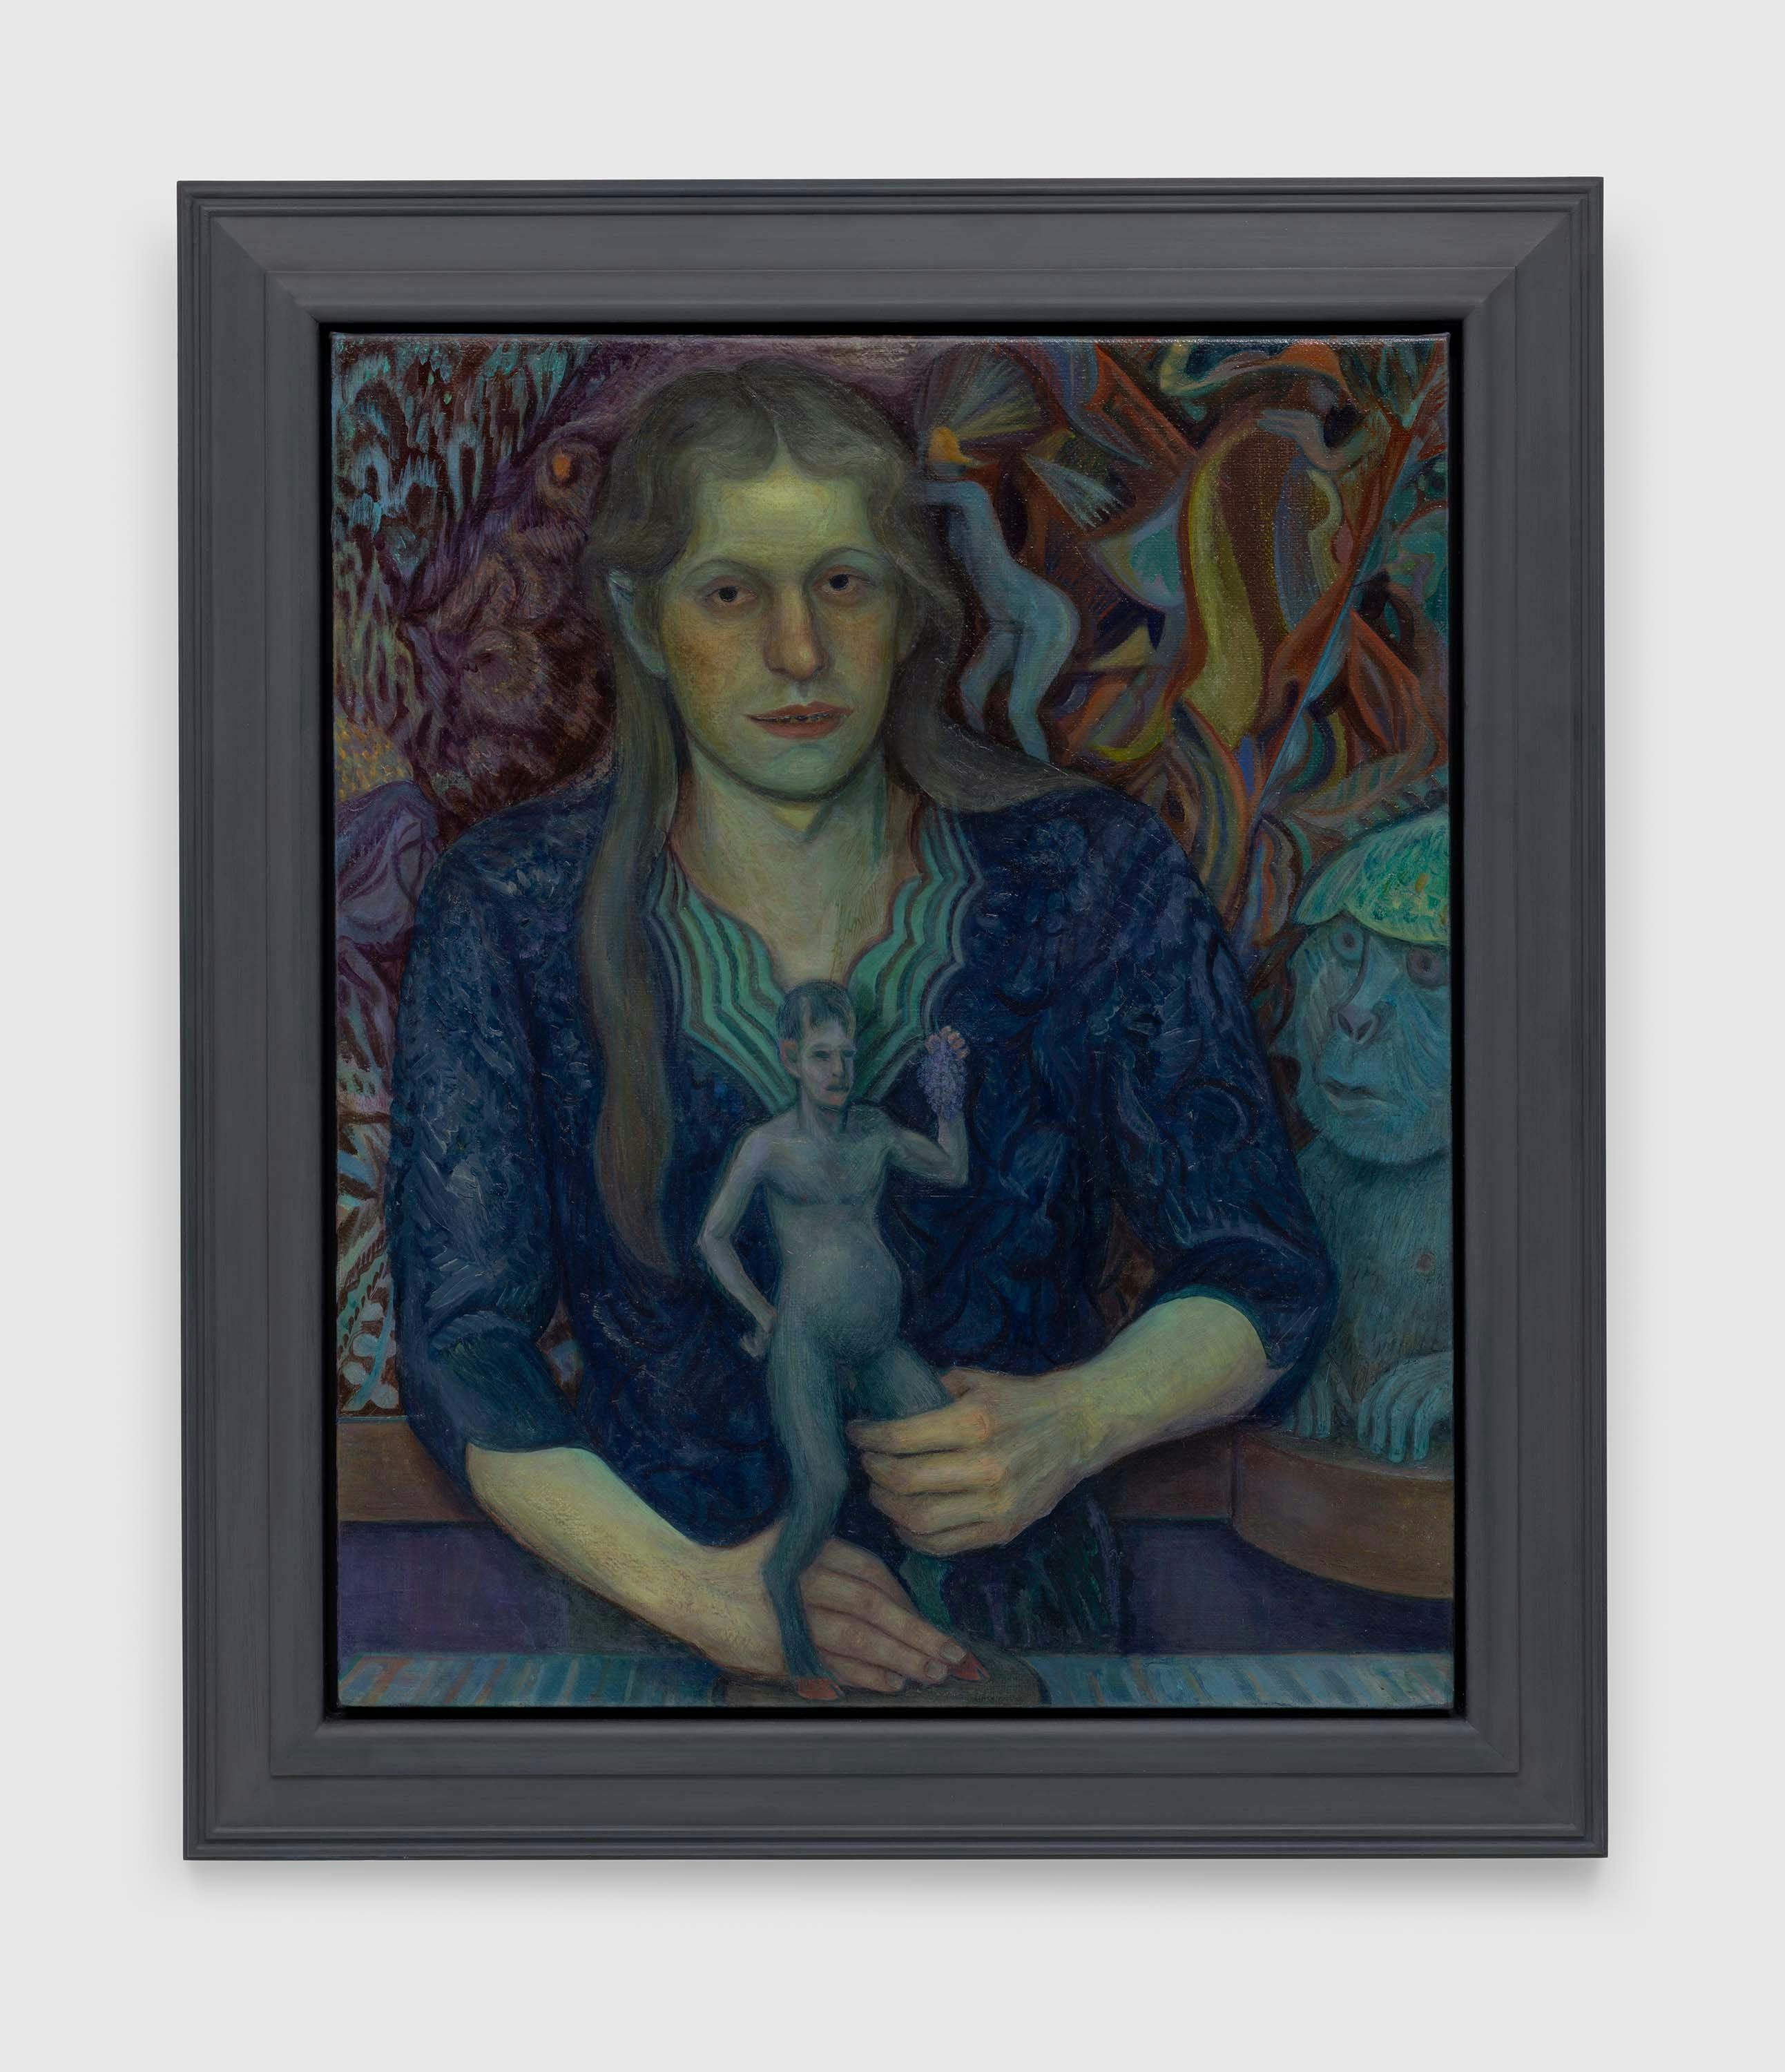 A painting by Steven Shearer, titled ﻿Sculptor and Satyr, dated 2016.